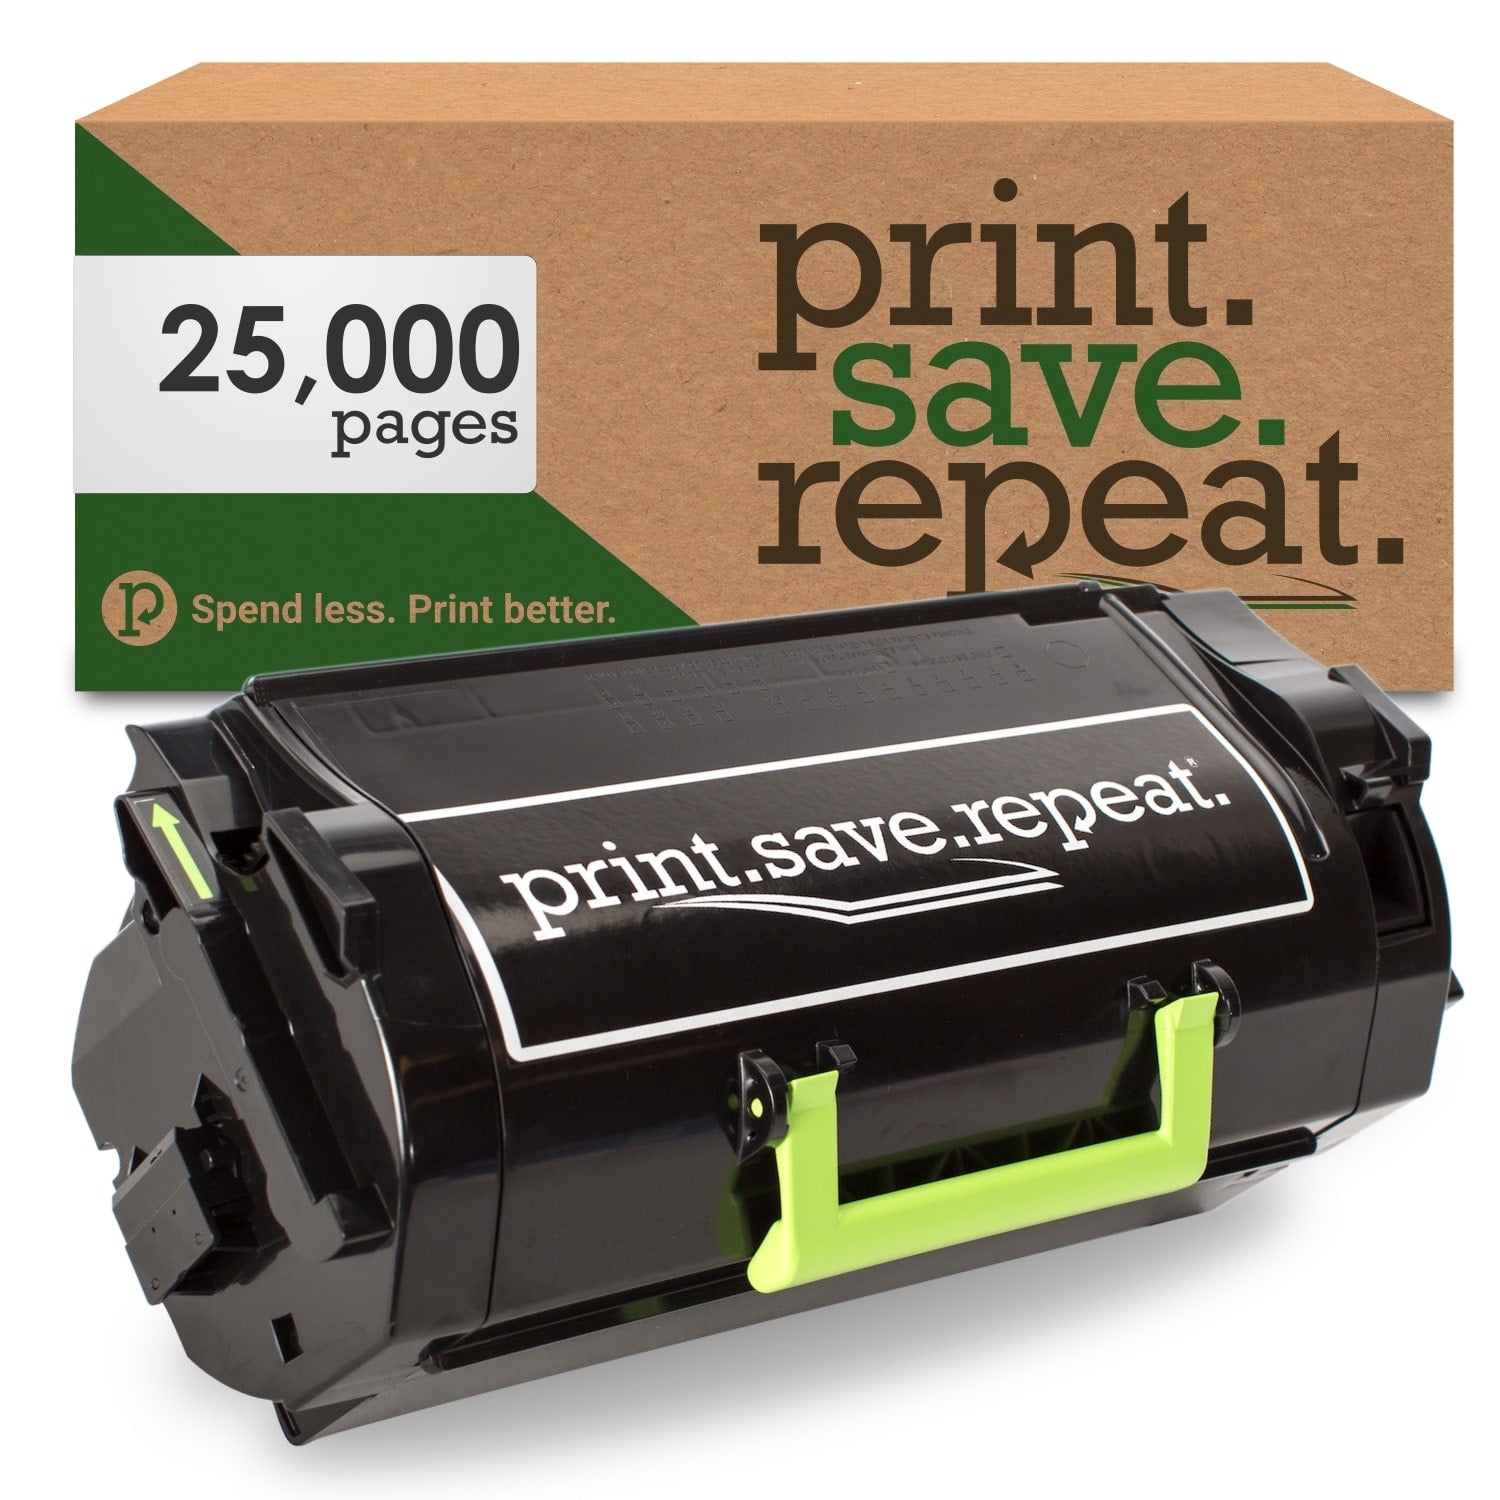 Print.Save.Repeat. Lexmark 620HG High Yield Remanufactured Toner Cartridge (62D0H0G) for MX710, MX711, MX810, MX811, MX812 [25,000 Pages]